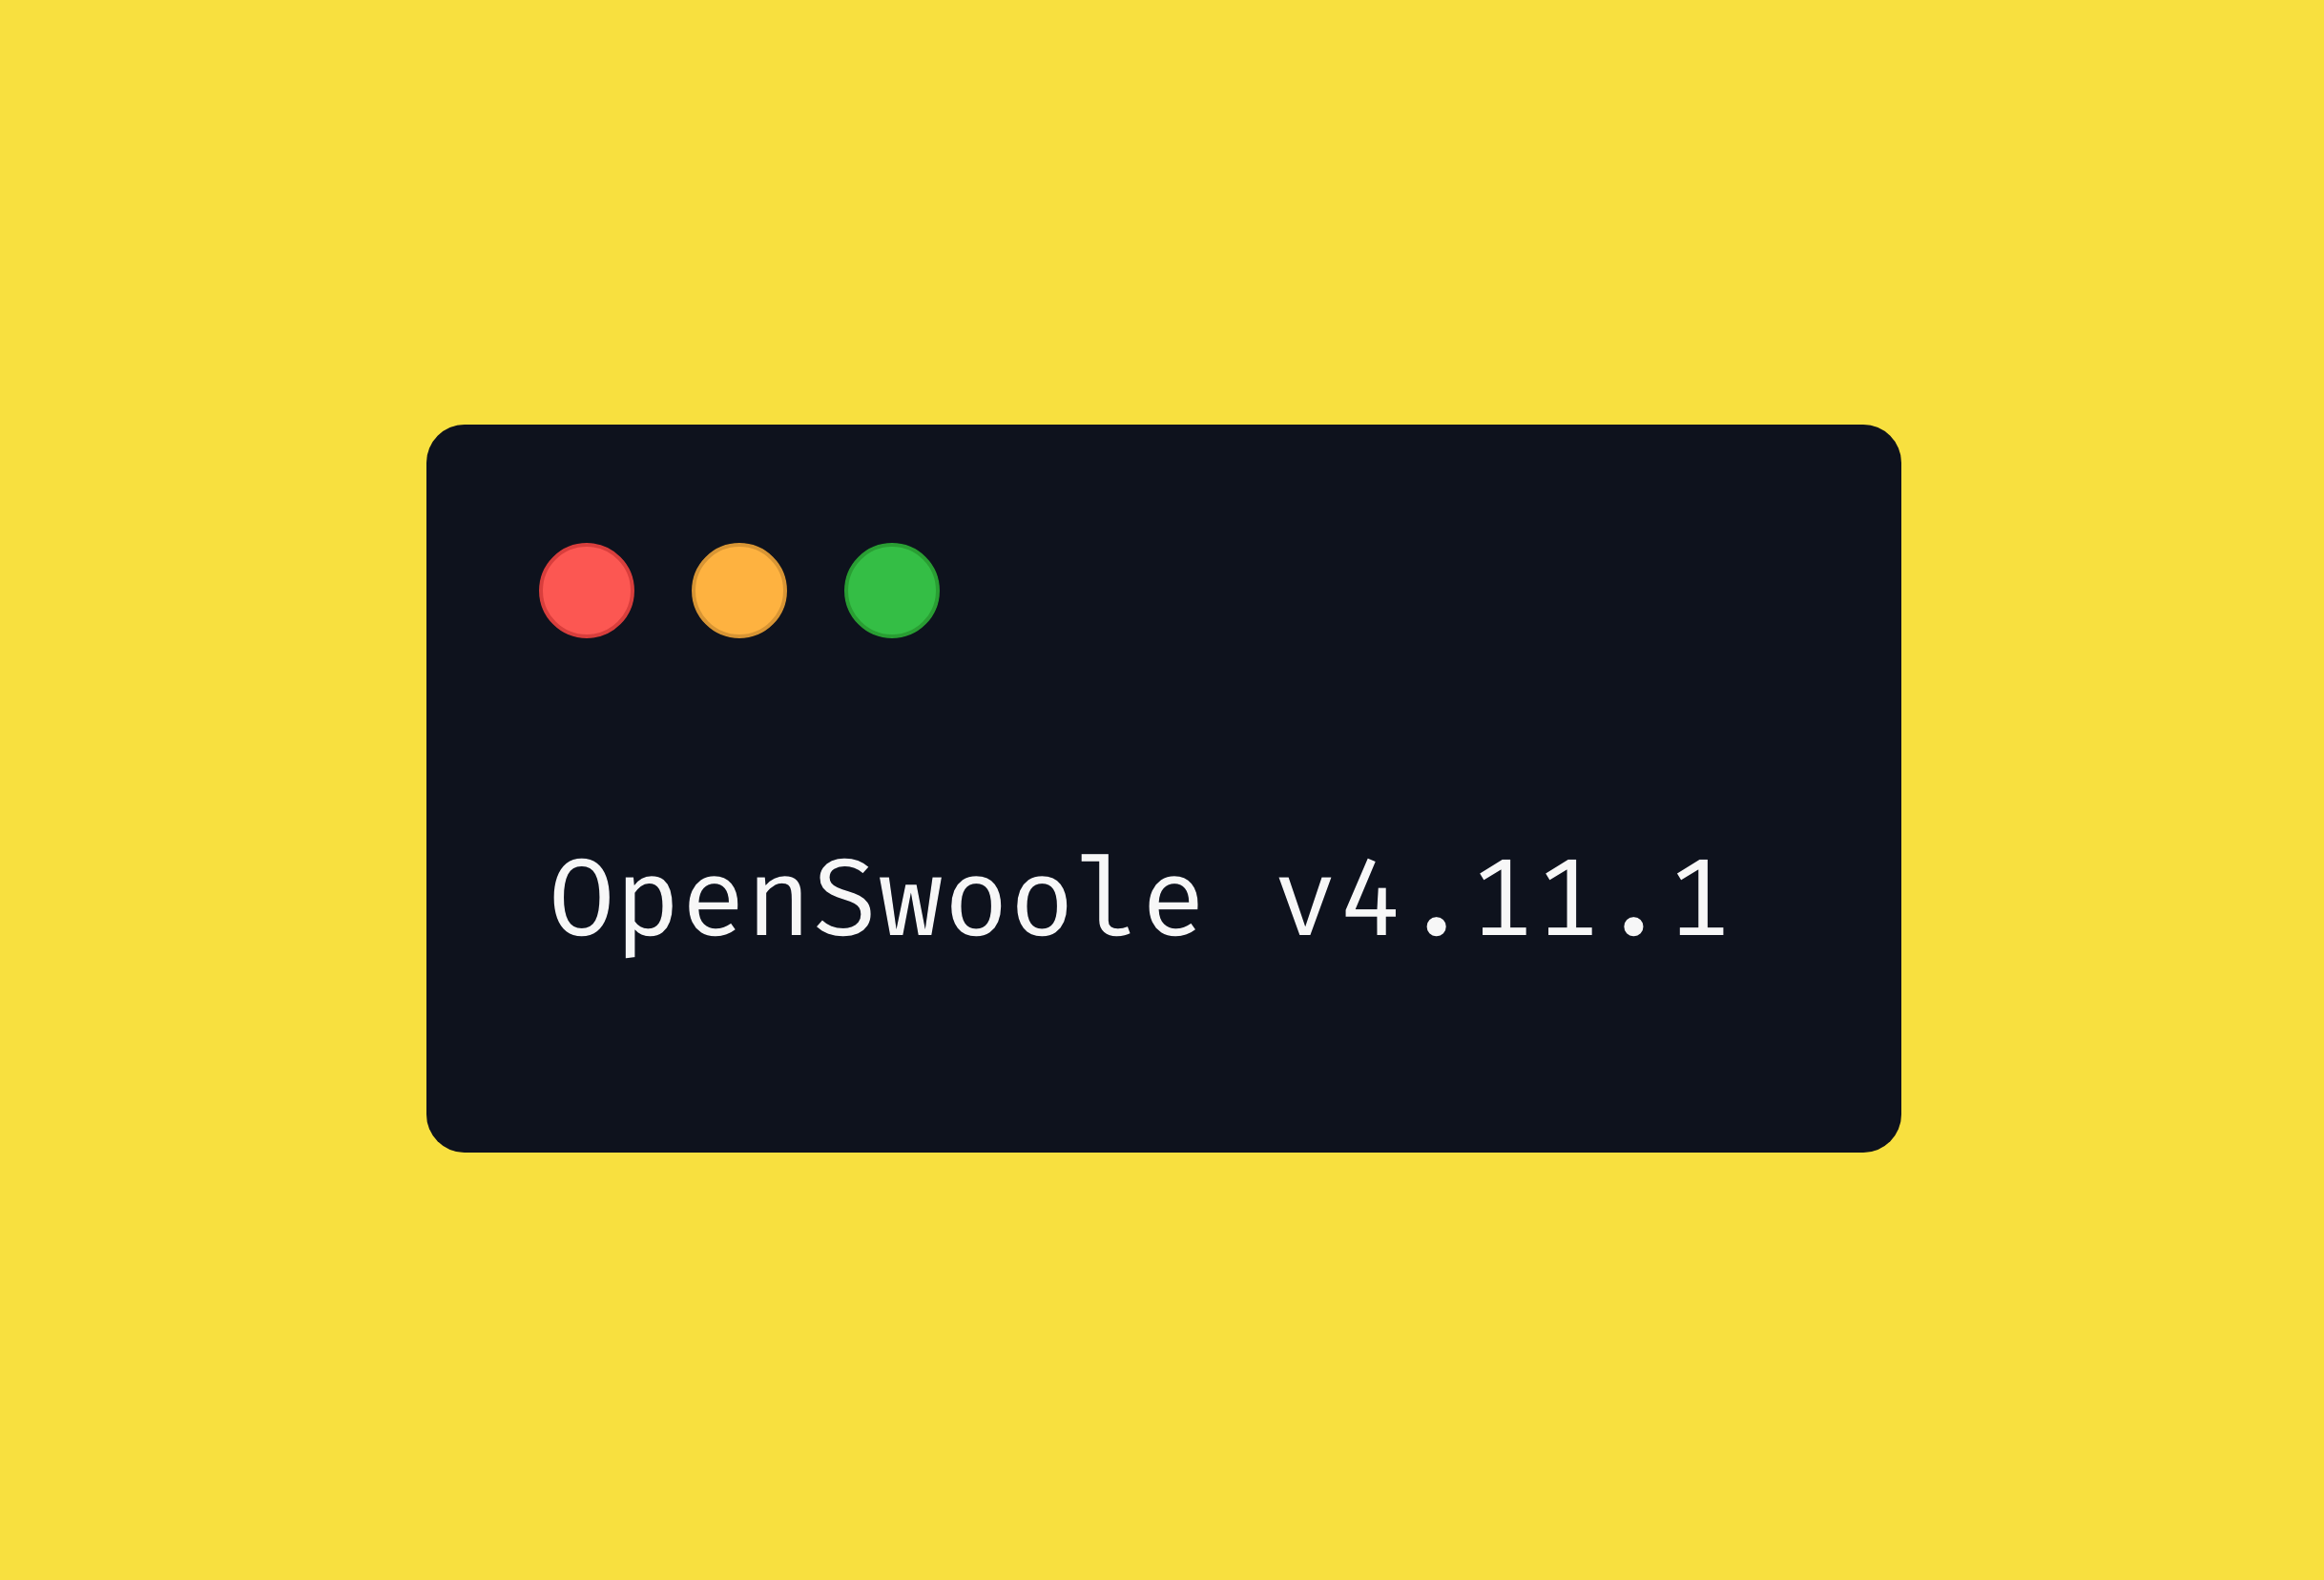 Official Open Swoole version 4.11.1